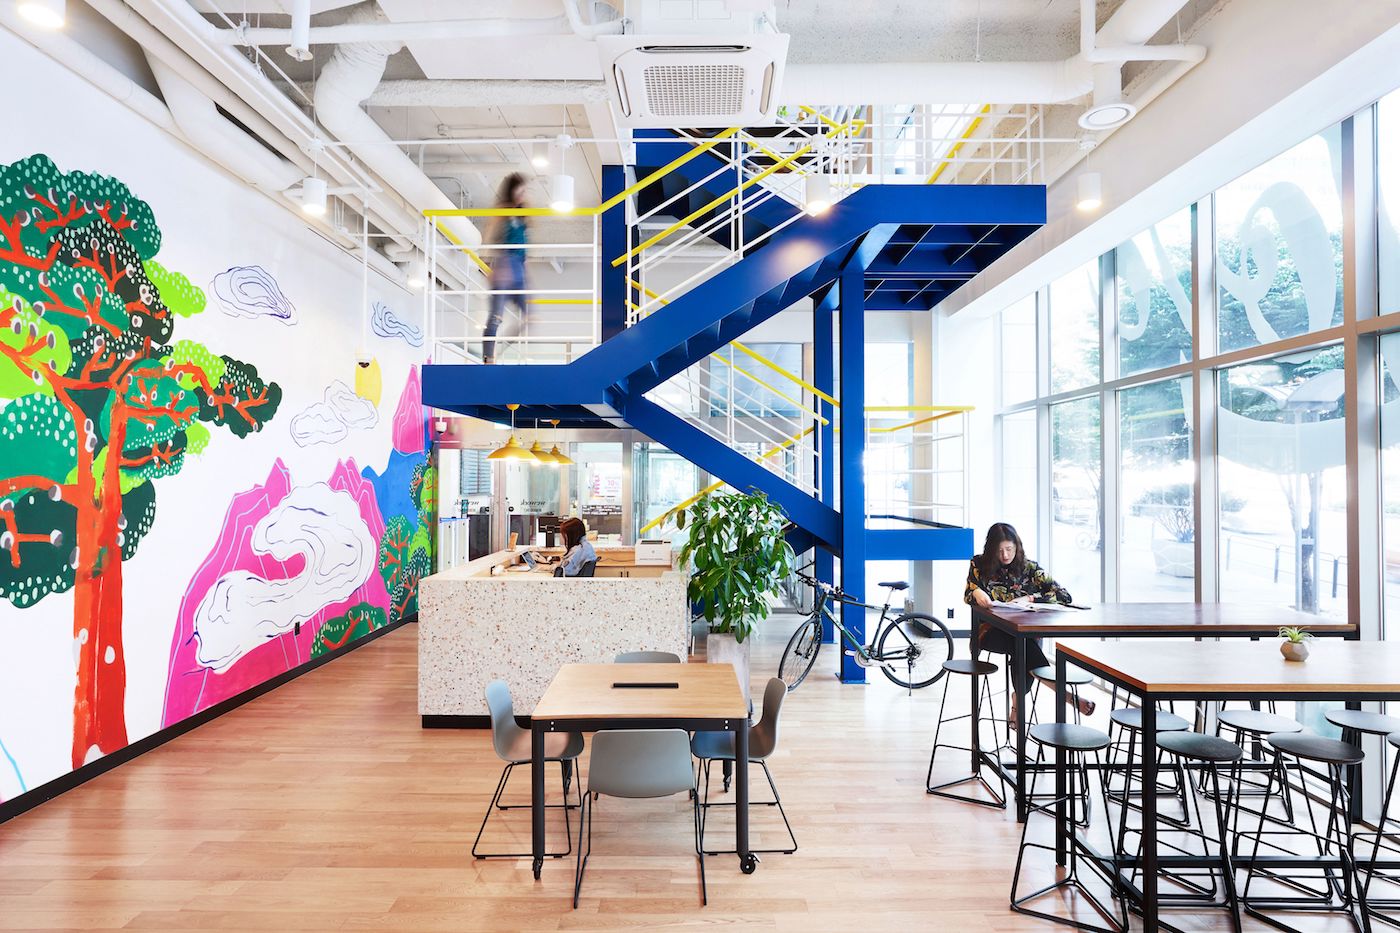 WeWork Seolleung in Seoul, South Korea. Photographs by The We Company